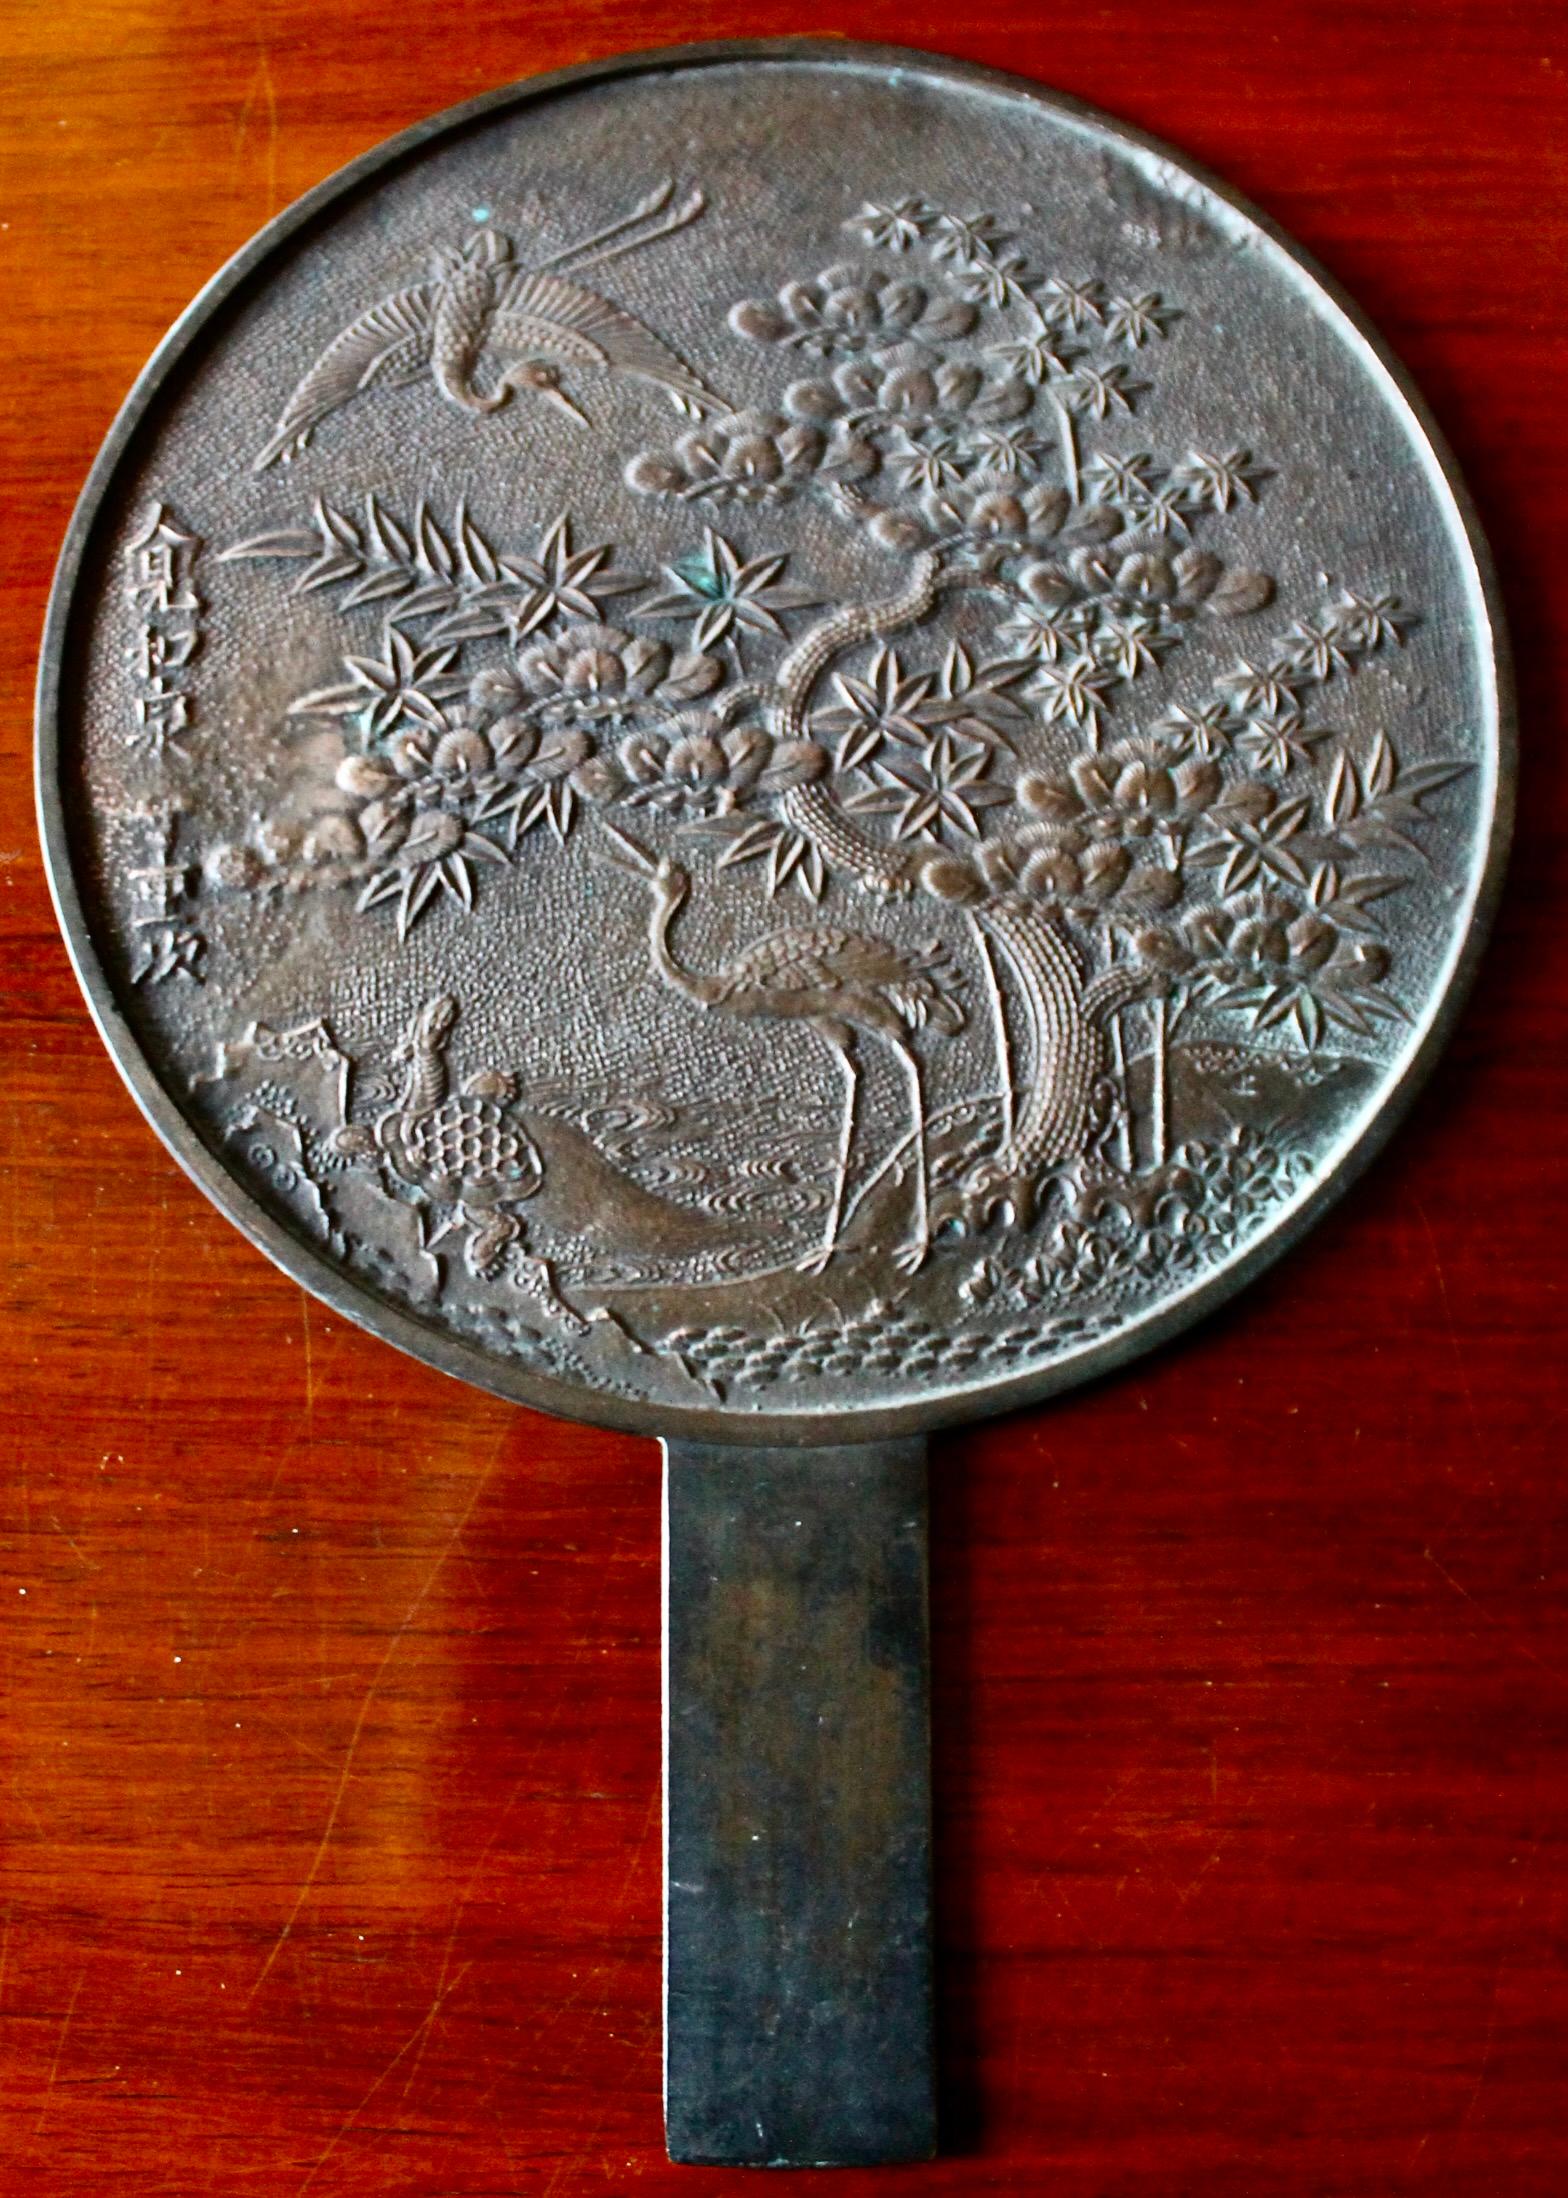 Meiji period cast bronze hand mirror.  Very fine casting quality depicting
typical Japanese motifs.